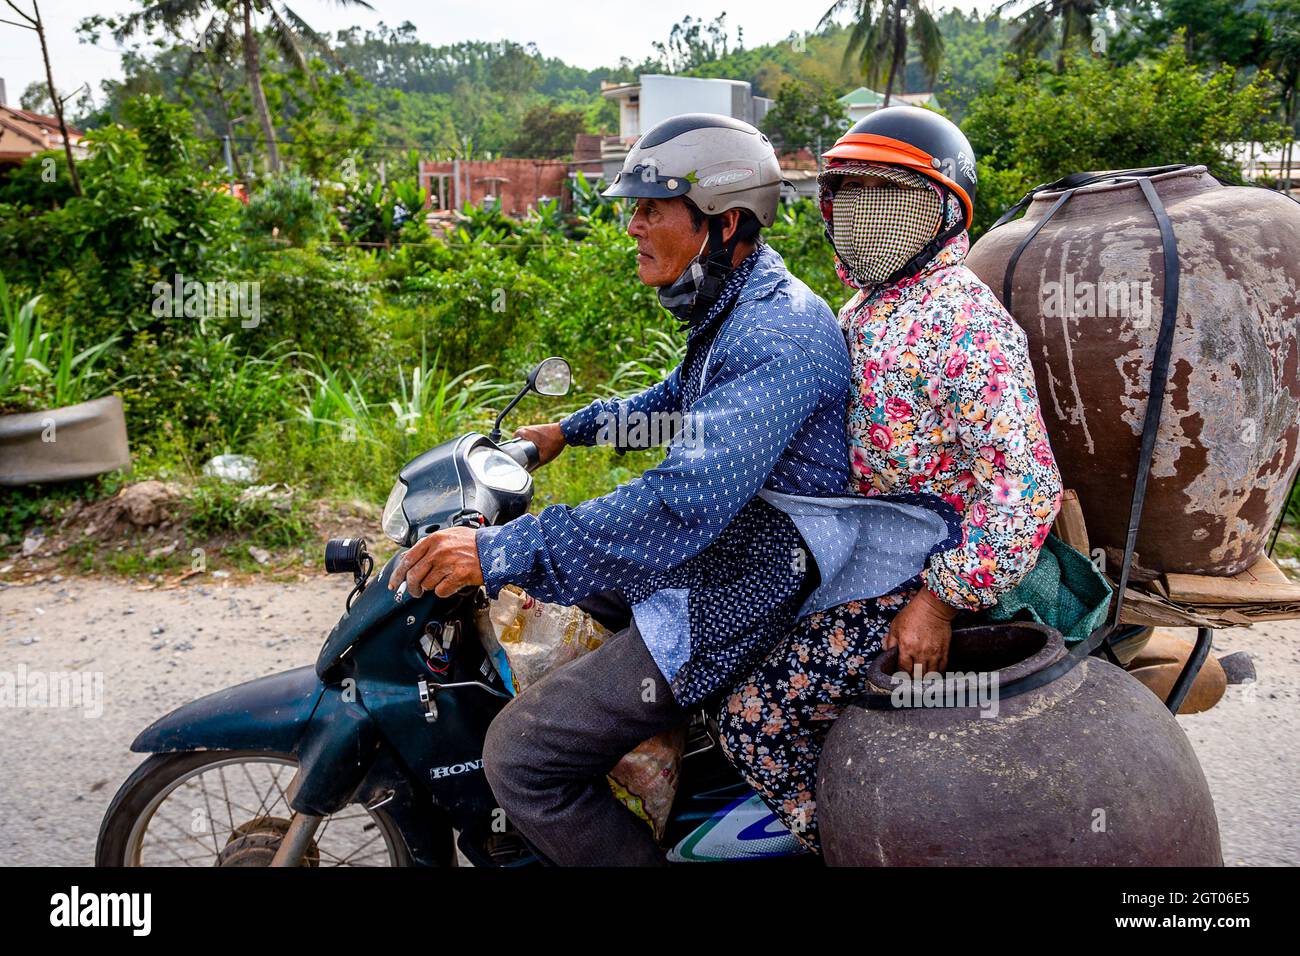 Two Vietnamese riding a motorbike carrying vases or containers on the back. Stock Photo